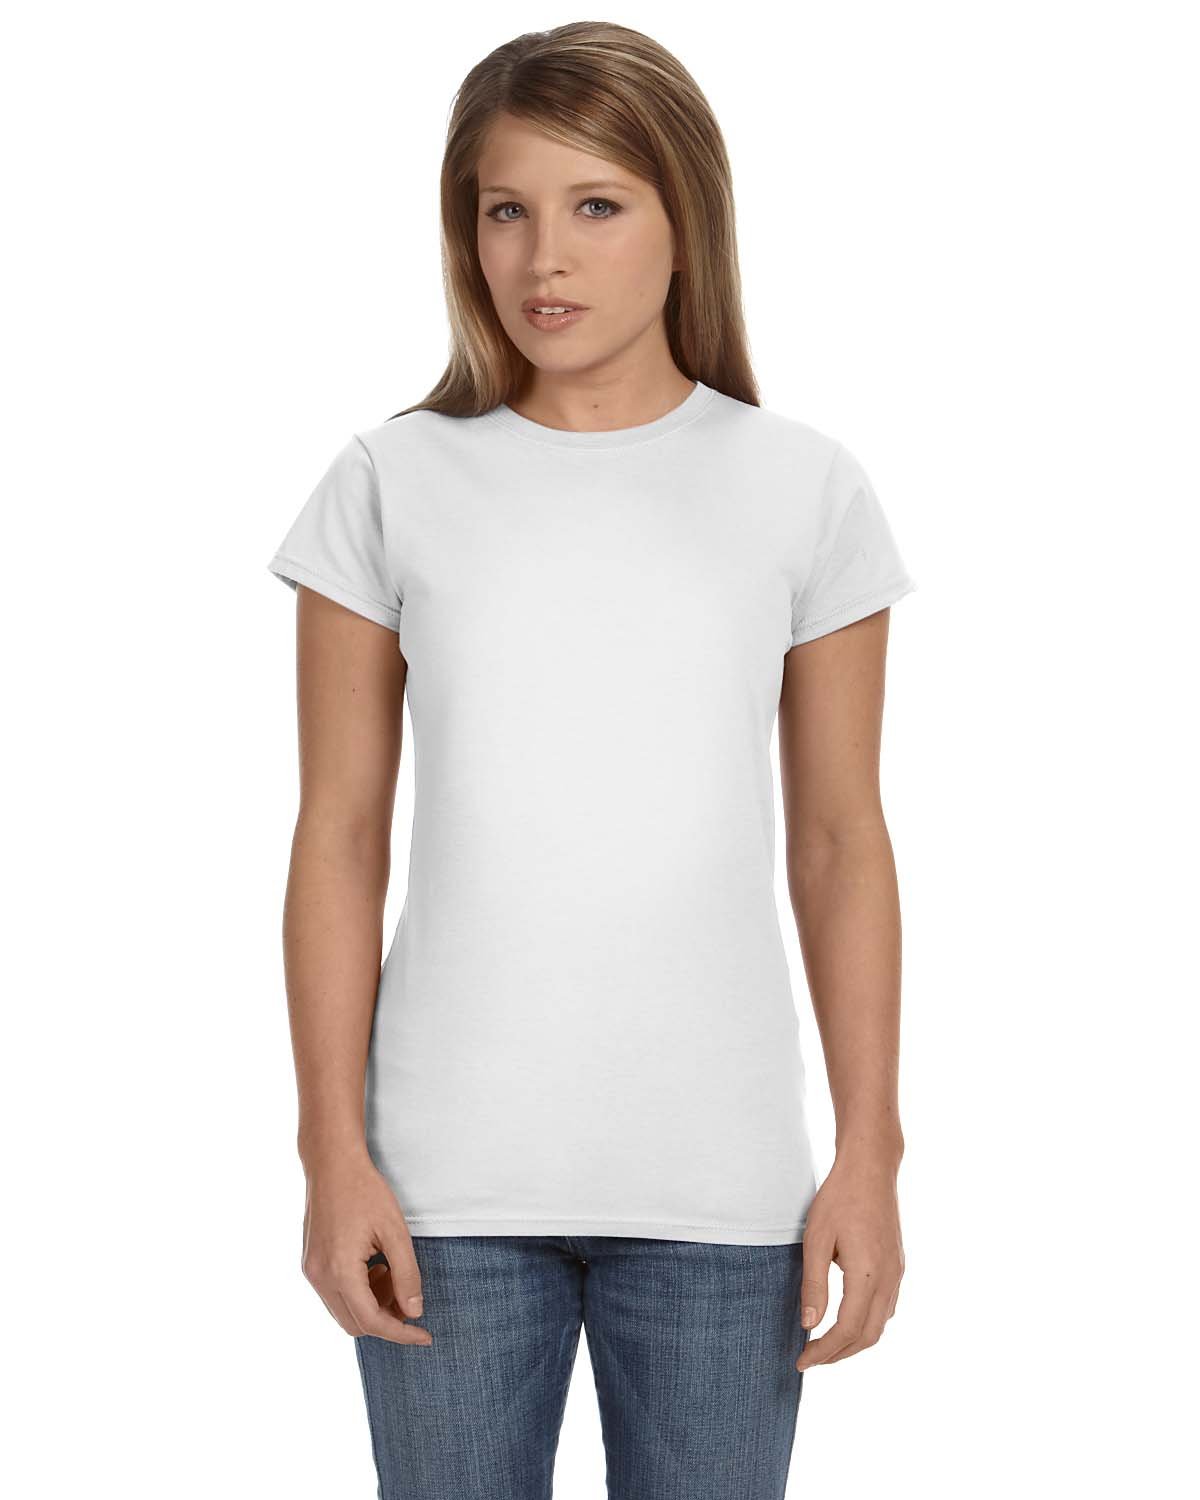 Gildan Ladies' Softstyle® Fitted T-Shirt WHITE 